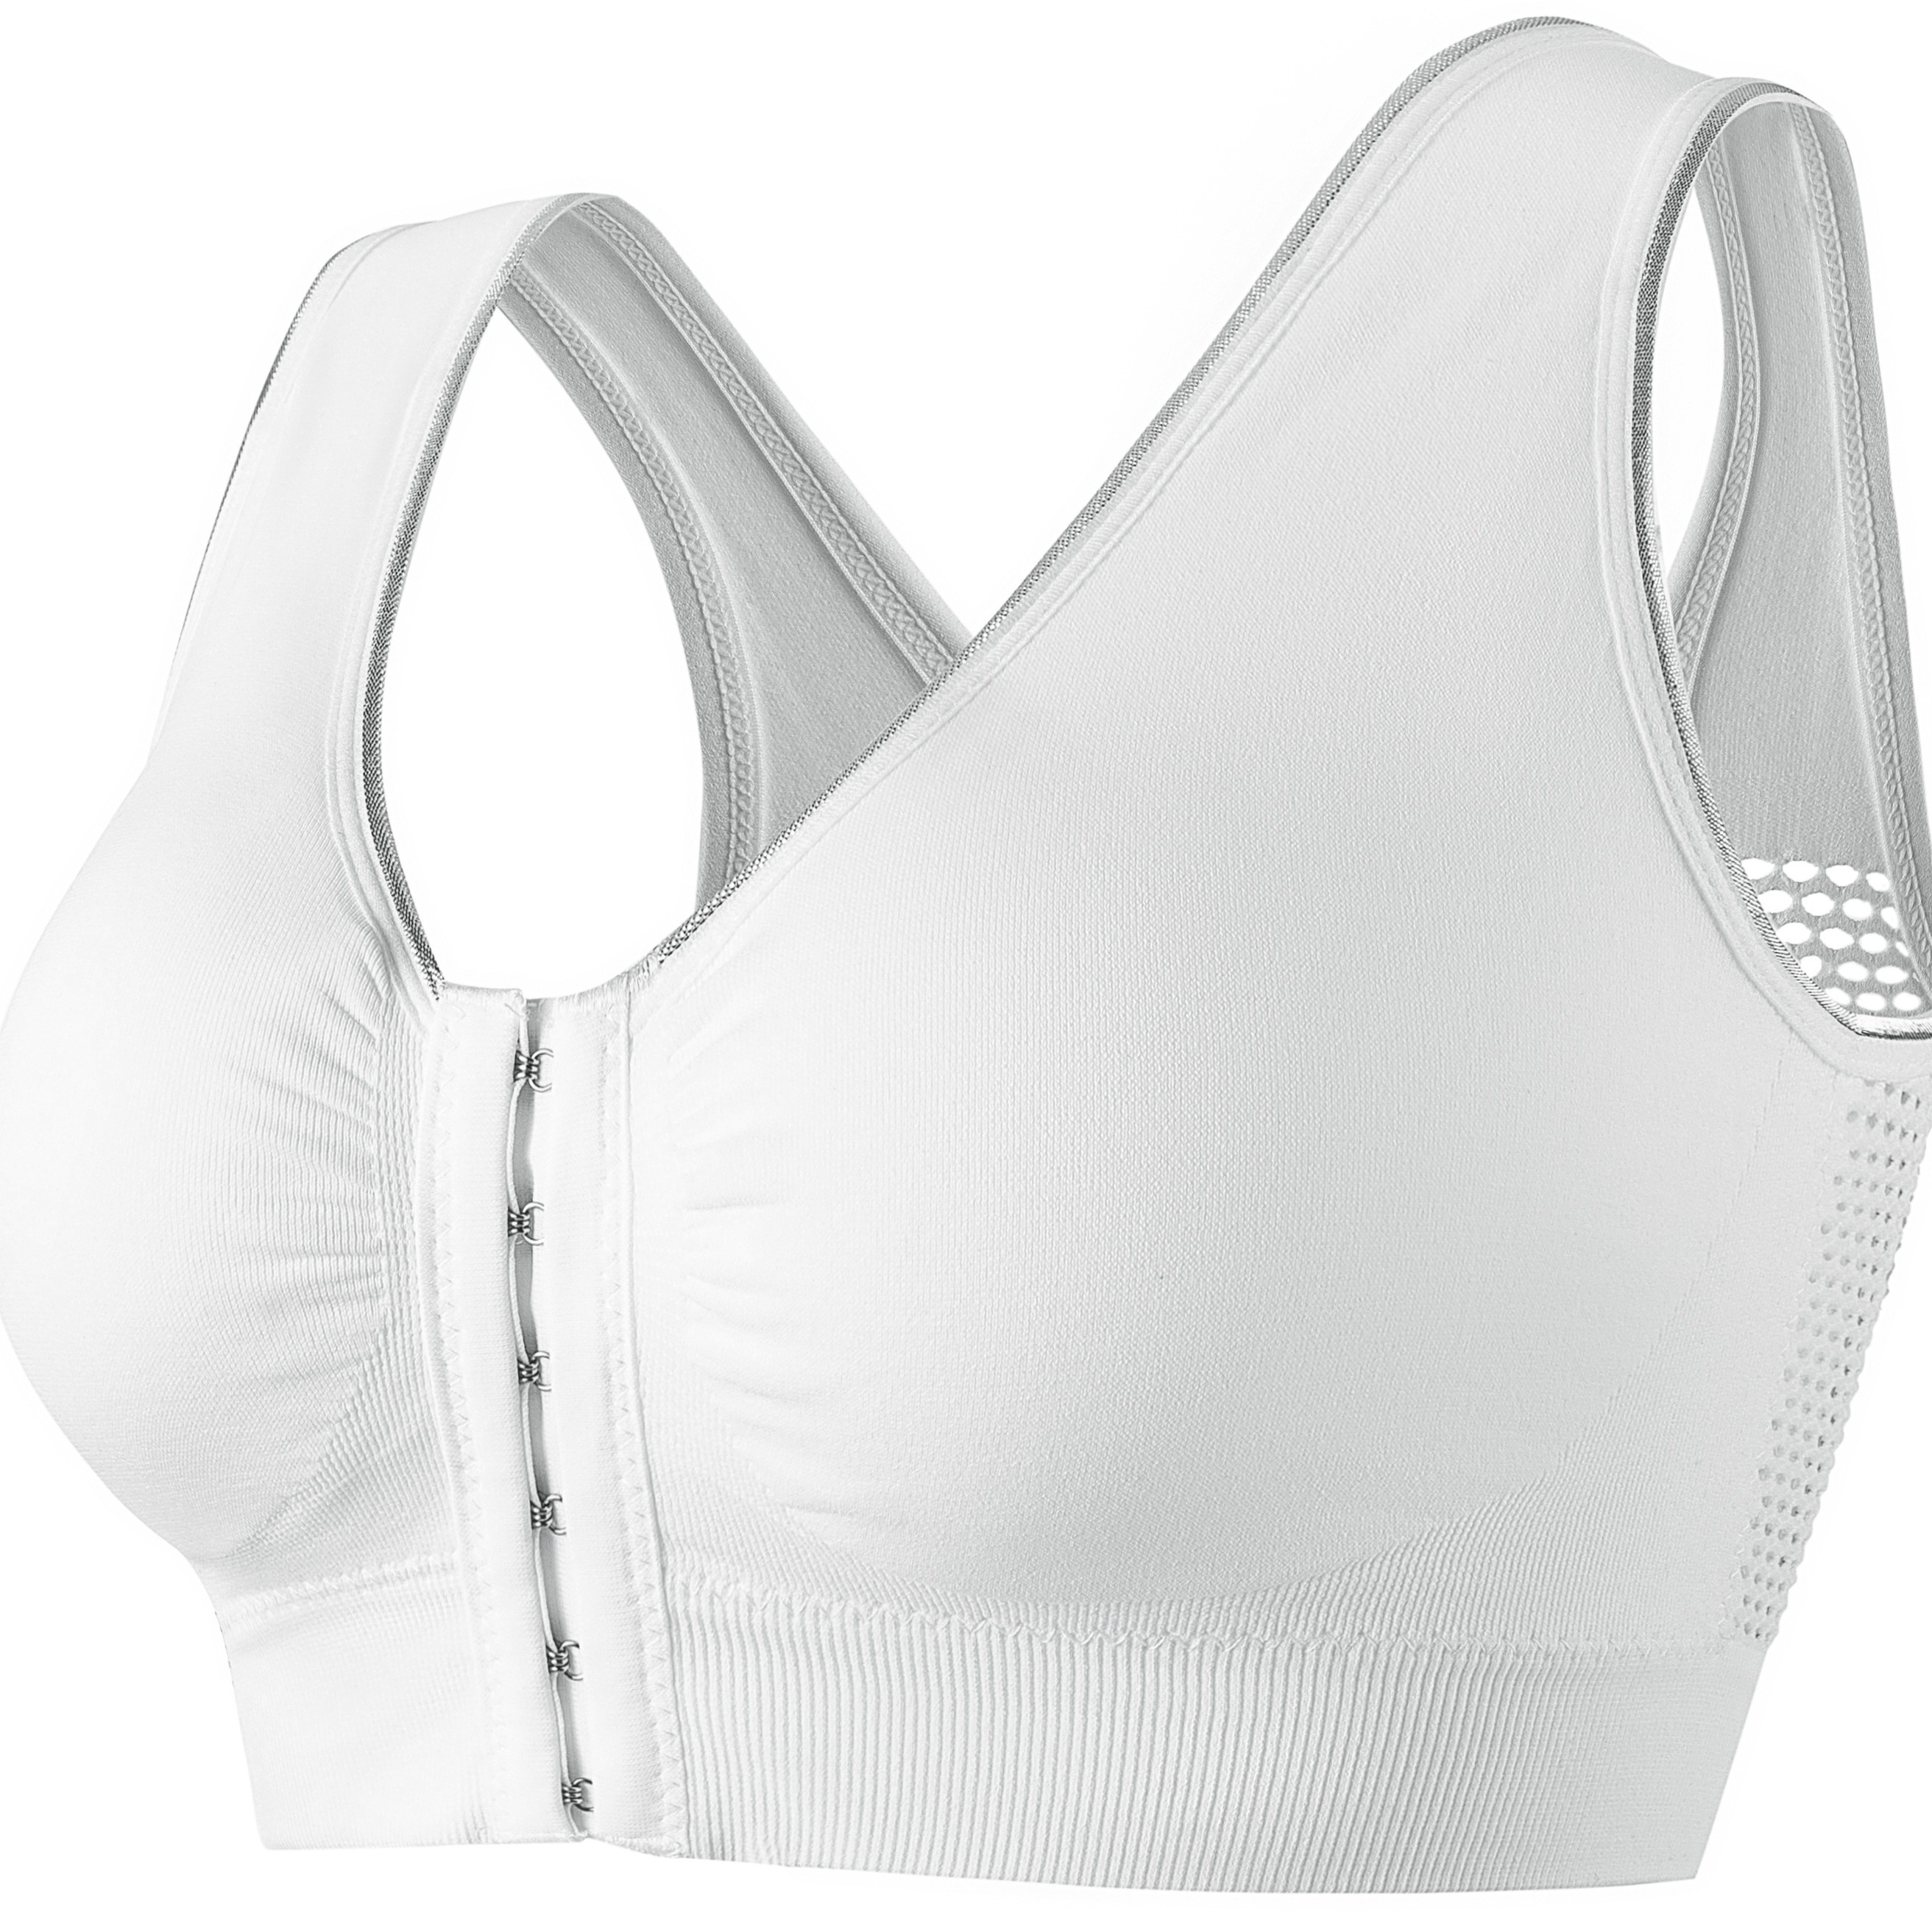 

Women's Sports Bra, Plus Size Buckle Open Front Solid Breathable Mesh Wireless Thin Fitness Yoga Running Bra